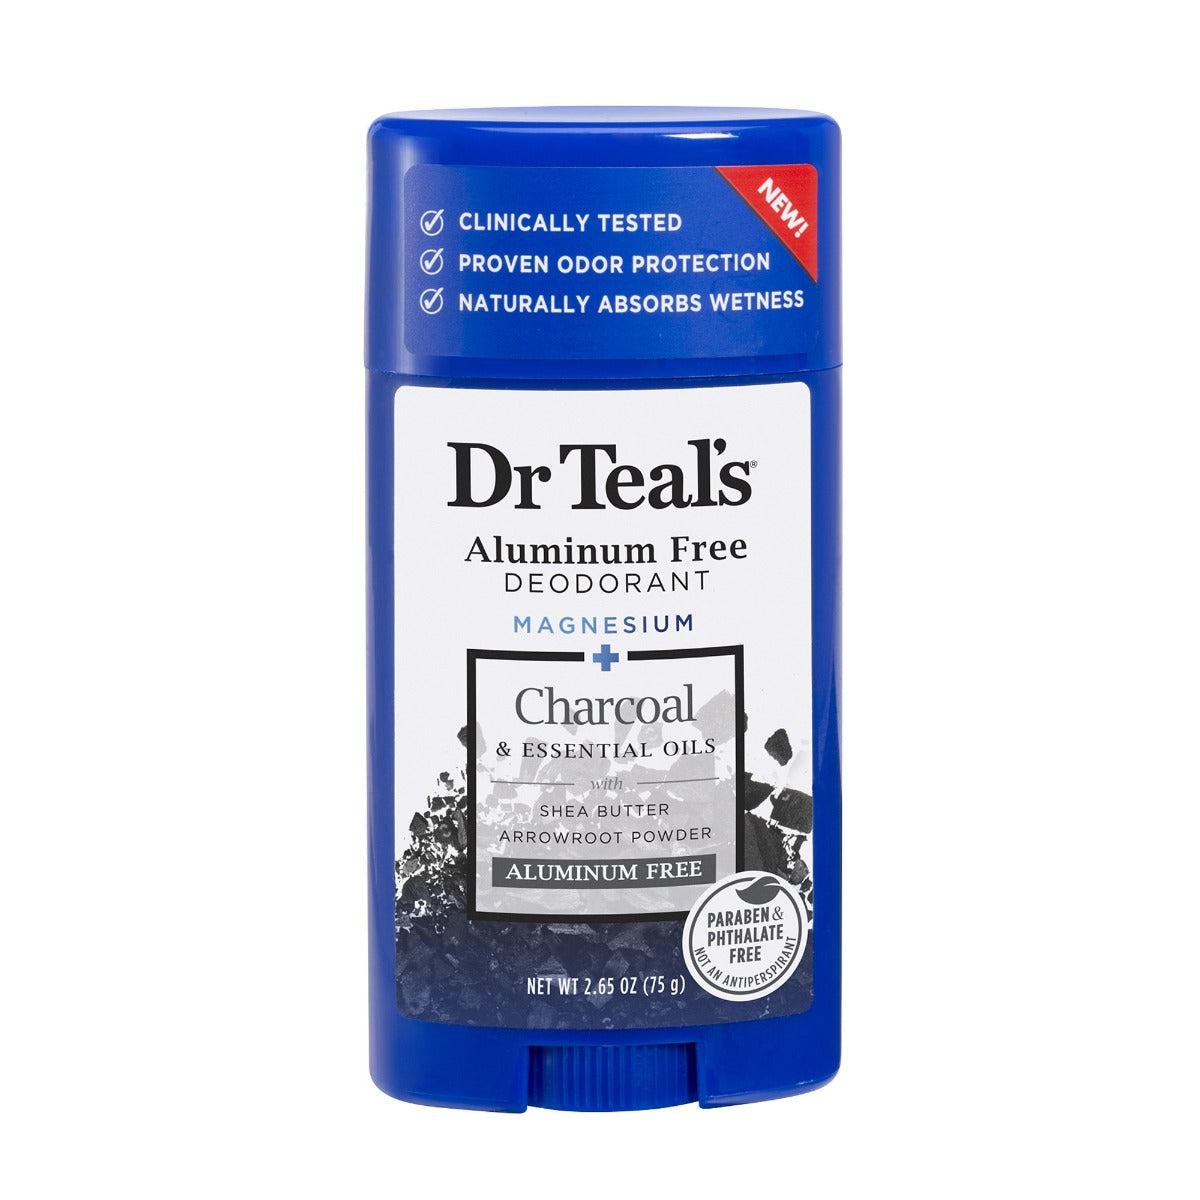 Dr. Teal's Aluminum Free Deodorant Charcoal & Essential Oils with Shea Butter 75g